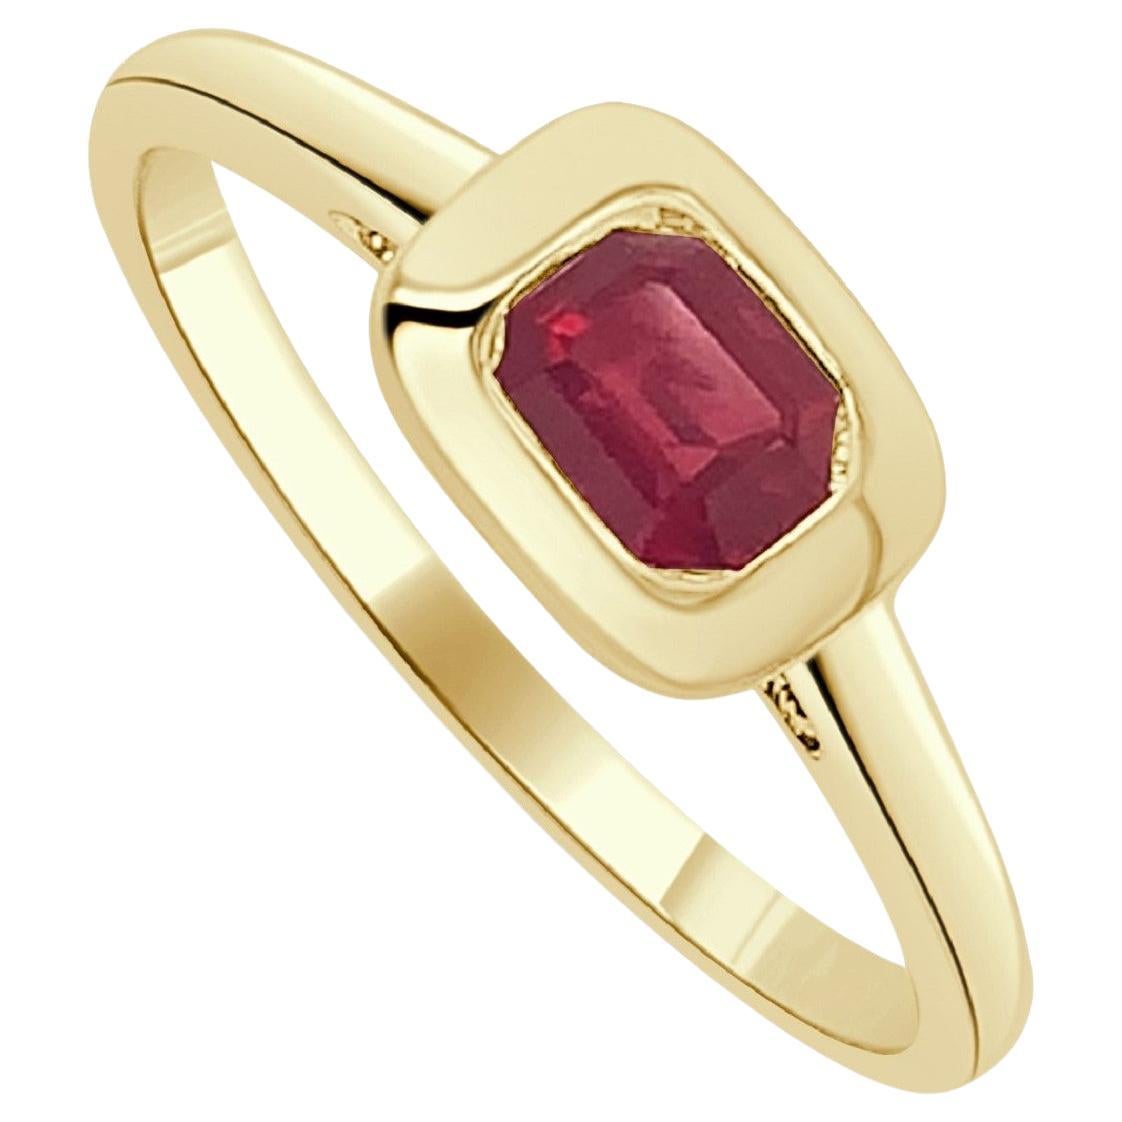 14k Yellow Gold & Emerald-Cut Red Ruby Emerald Ring 0.65 CTTW